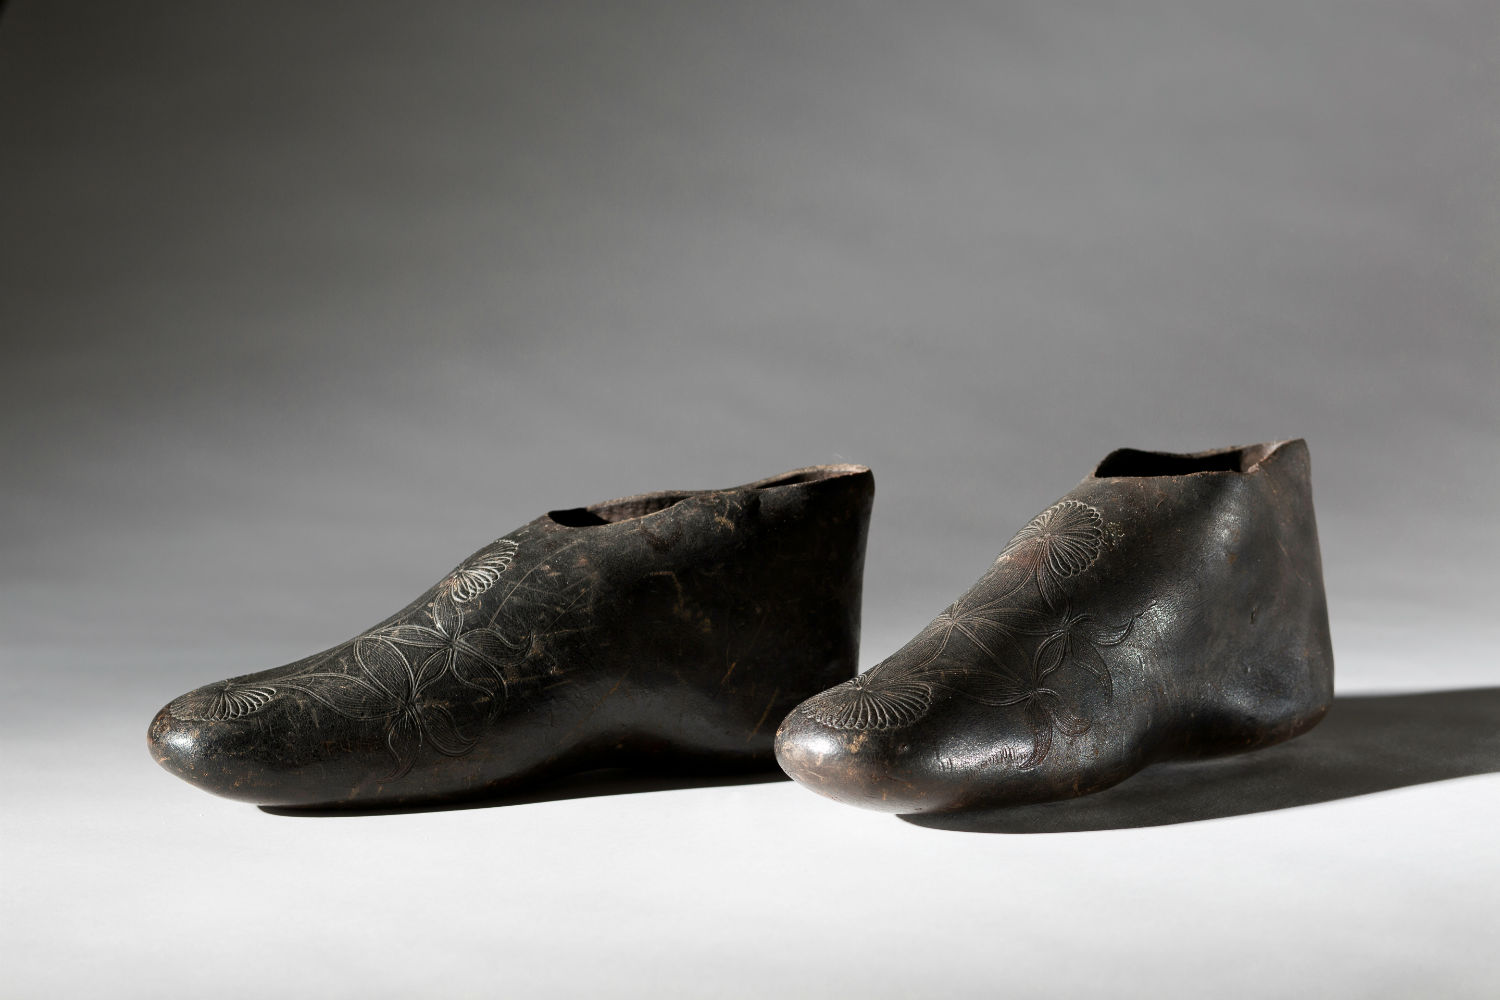 Manufacturer Unknown Pre-vulcanized Rubber Overshoes, ca. 1830s. Collection of the Bata Shoe Museum Photo: Ron Wood. Courtesy American Federation of Arts/Bata Shoe Museum